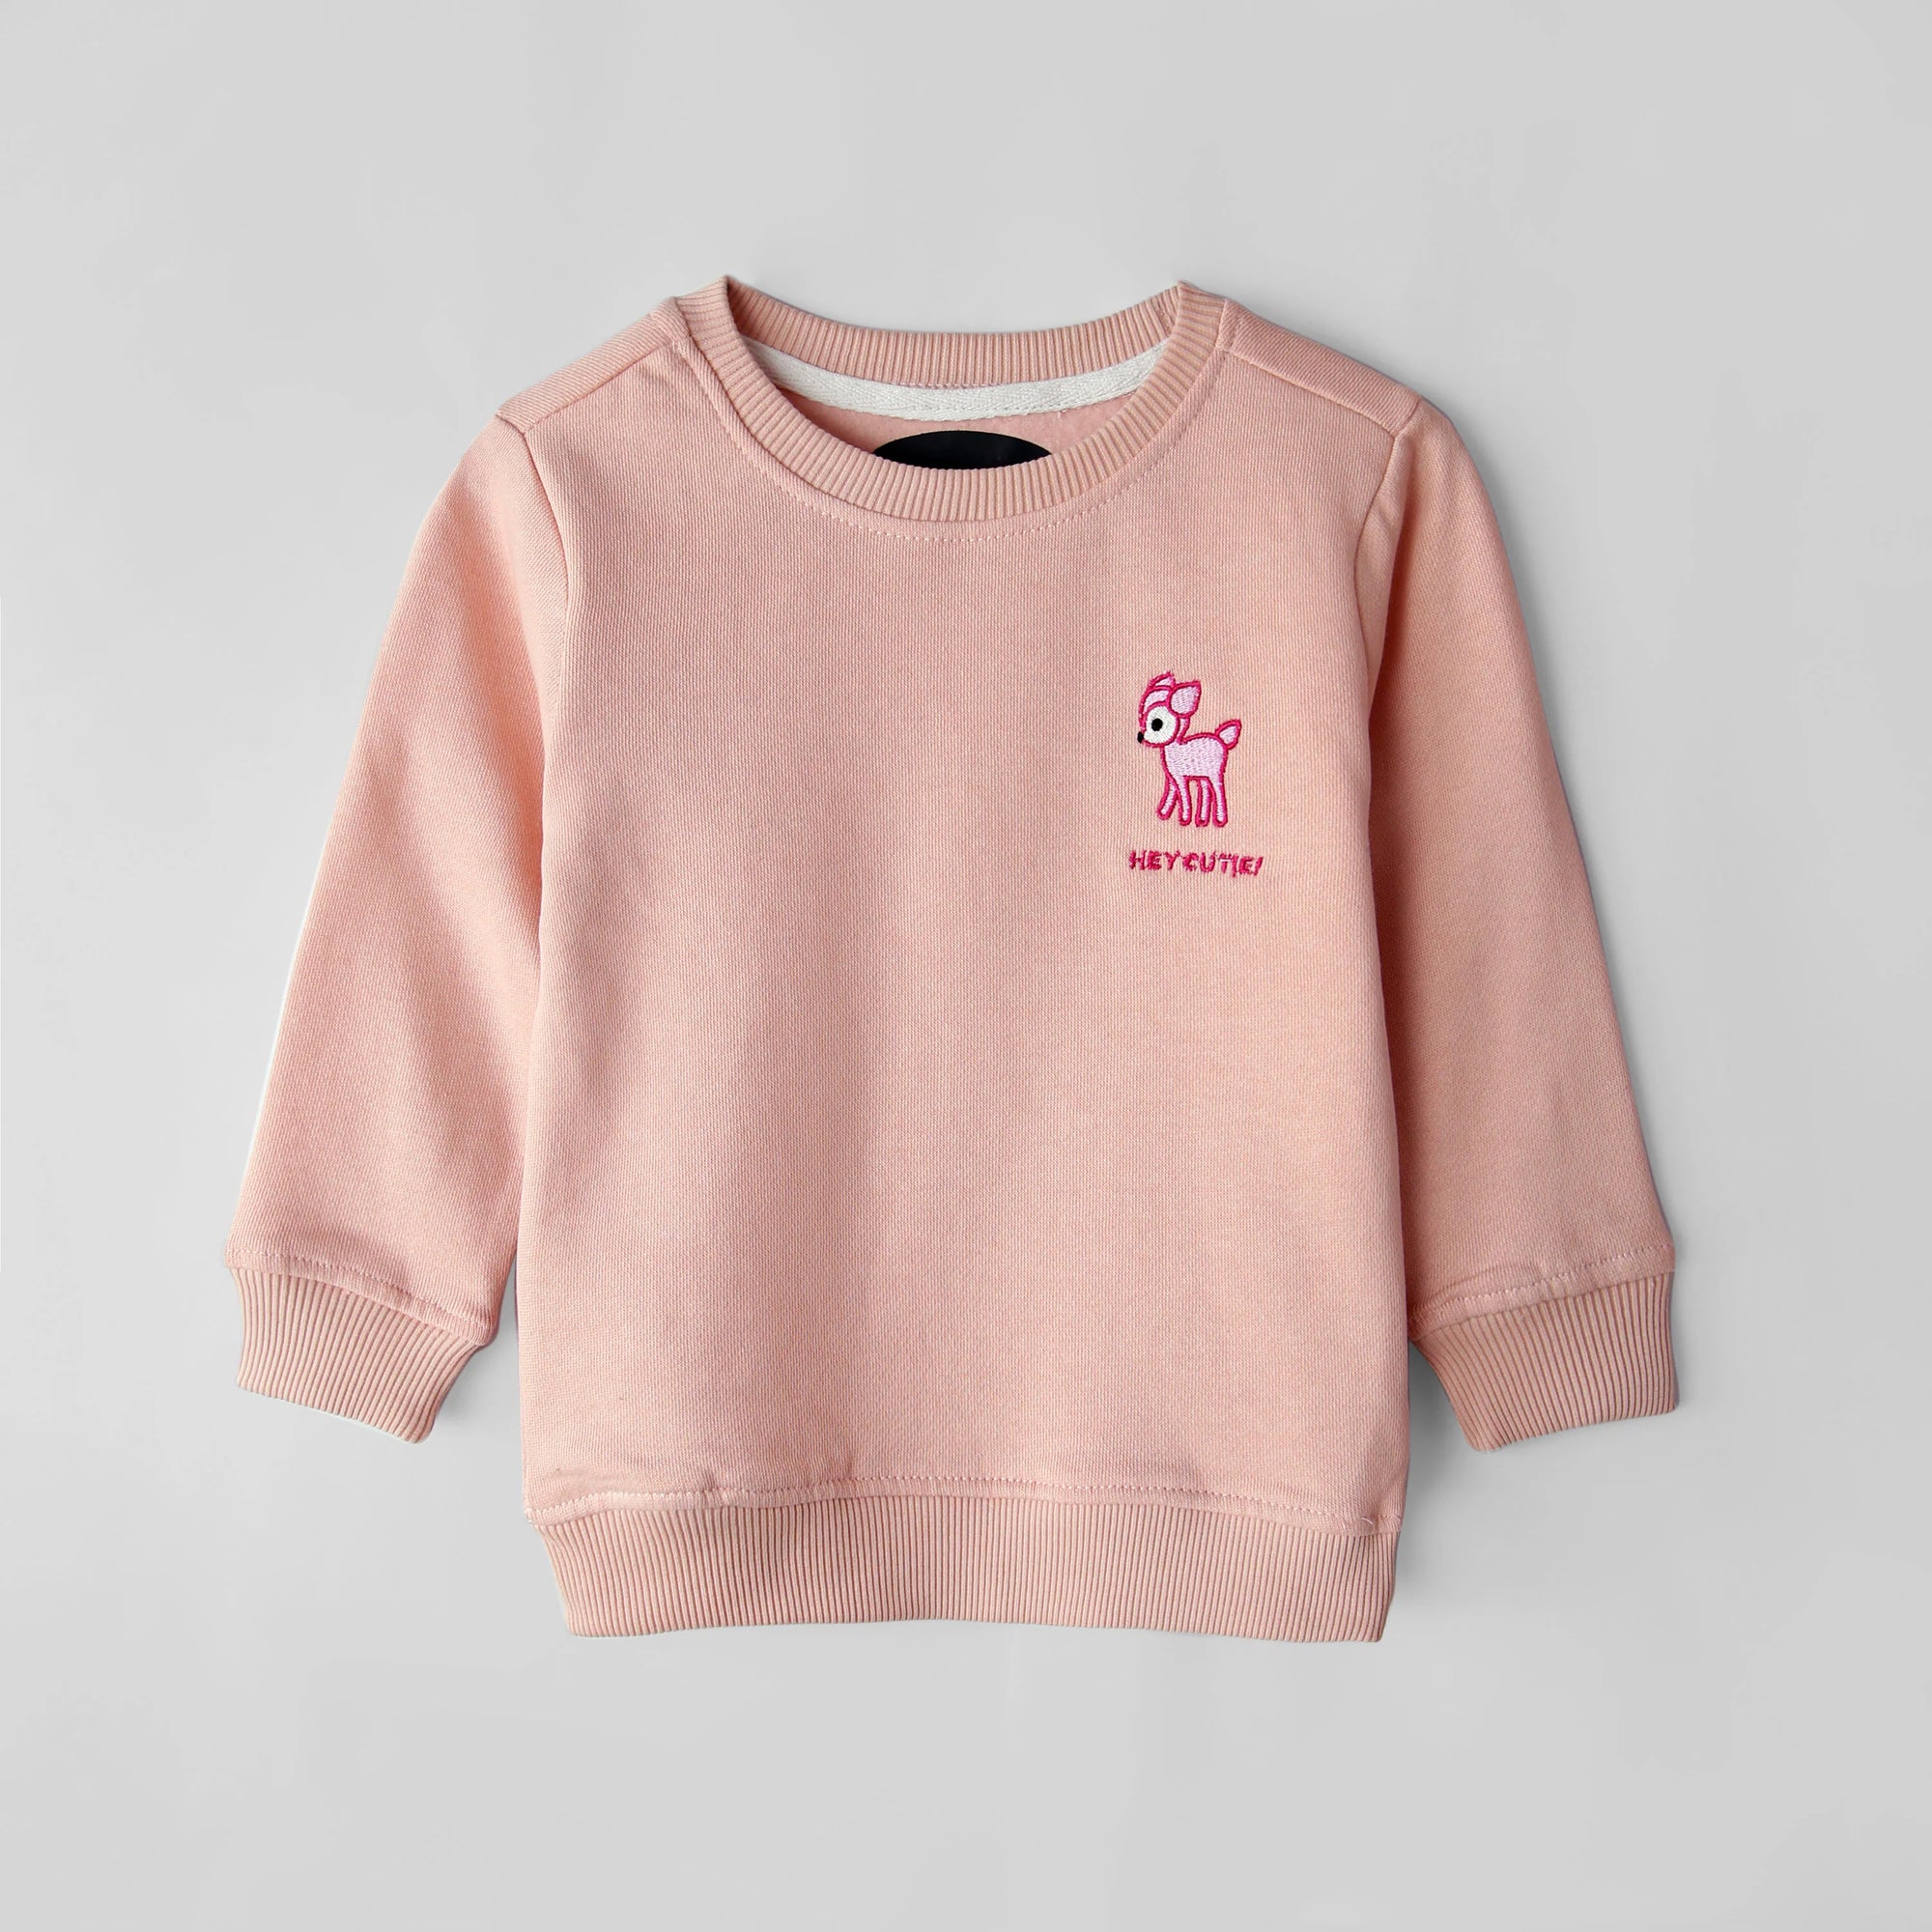 Premium Quality Pink Embroidered Soft Fleece Sweat Shirt For Girls (121873)